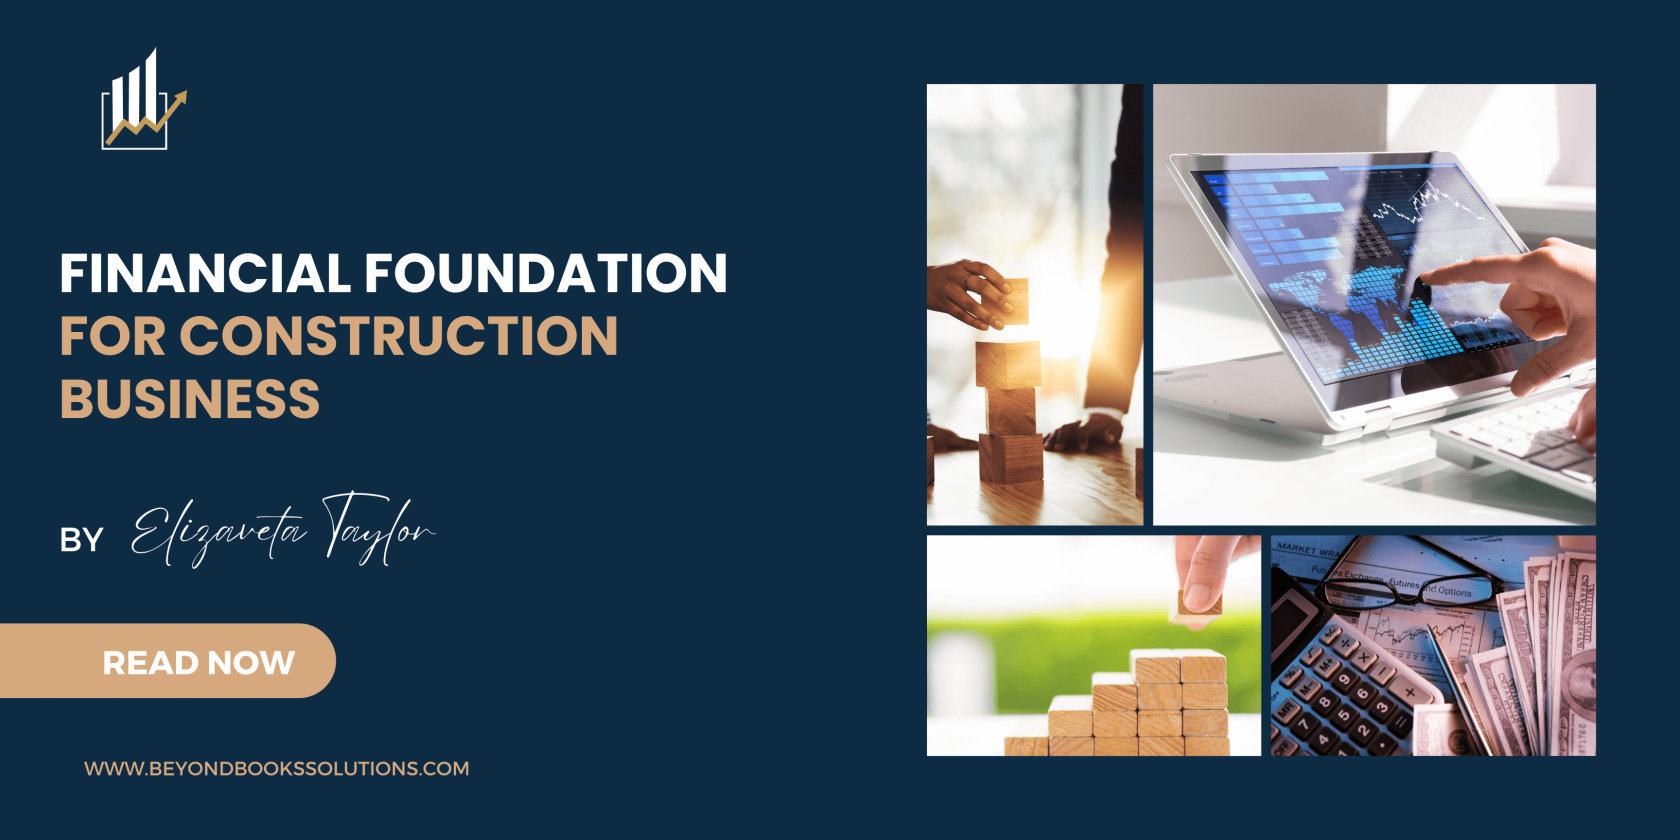 Financial Foundation for Construction Business